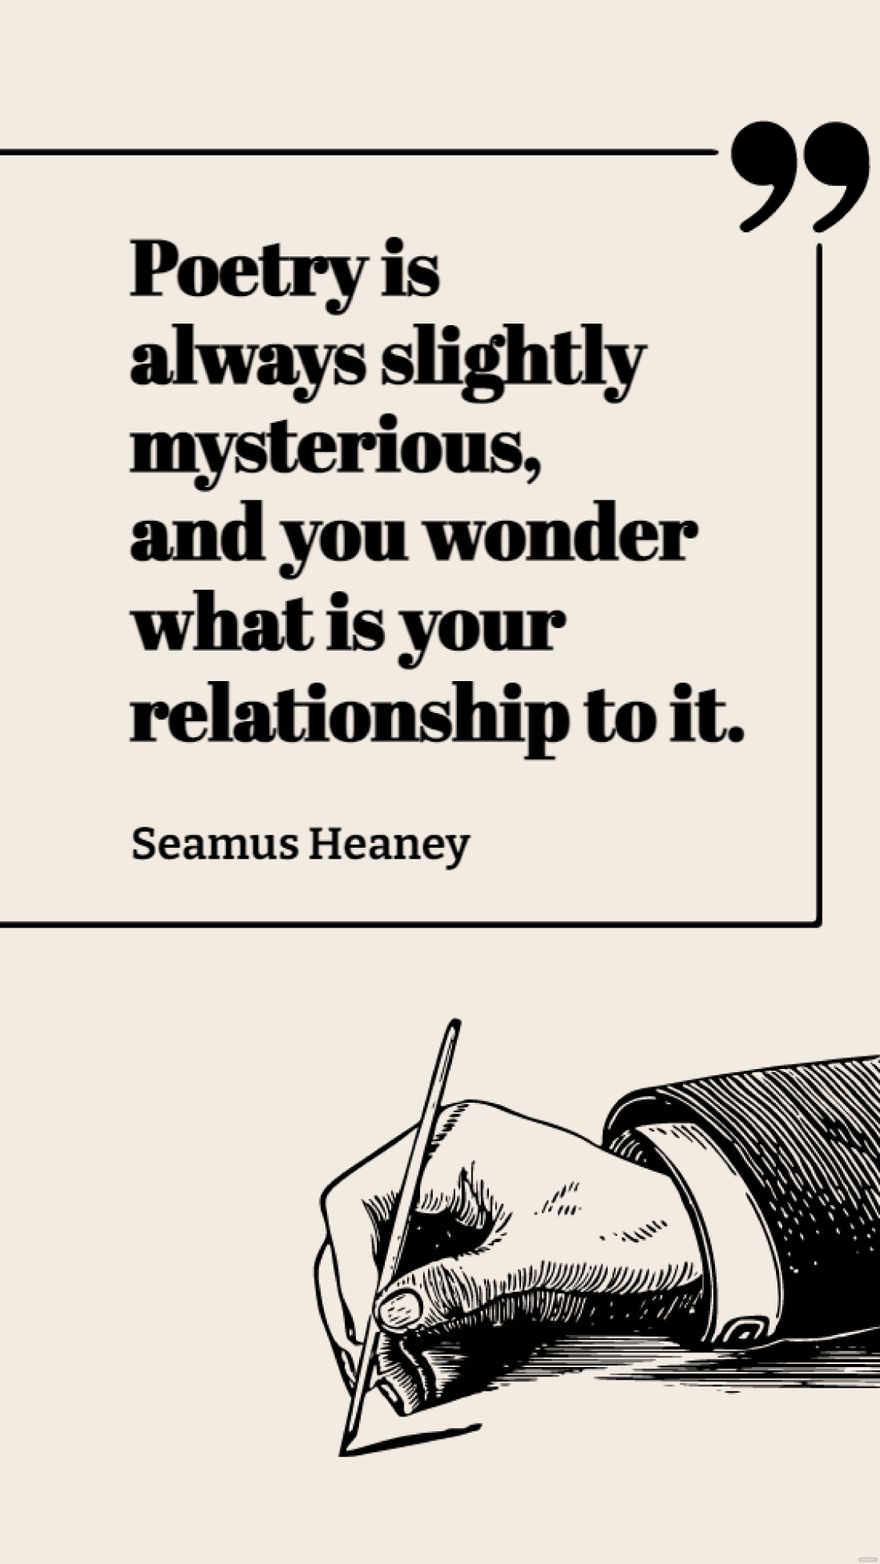 Seamus Heaney - Poetry is always slightly mysterious, and you wonder what is your relationship to it.